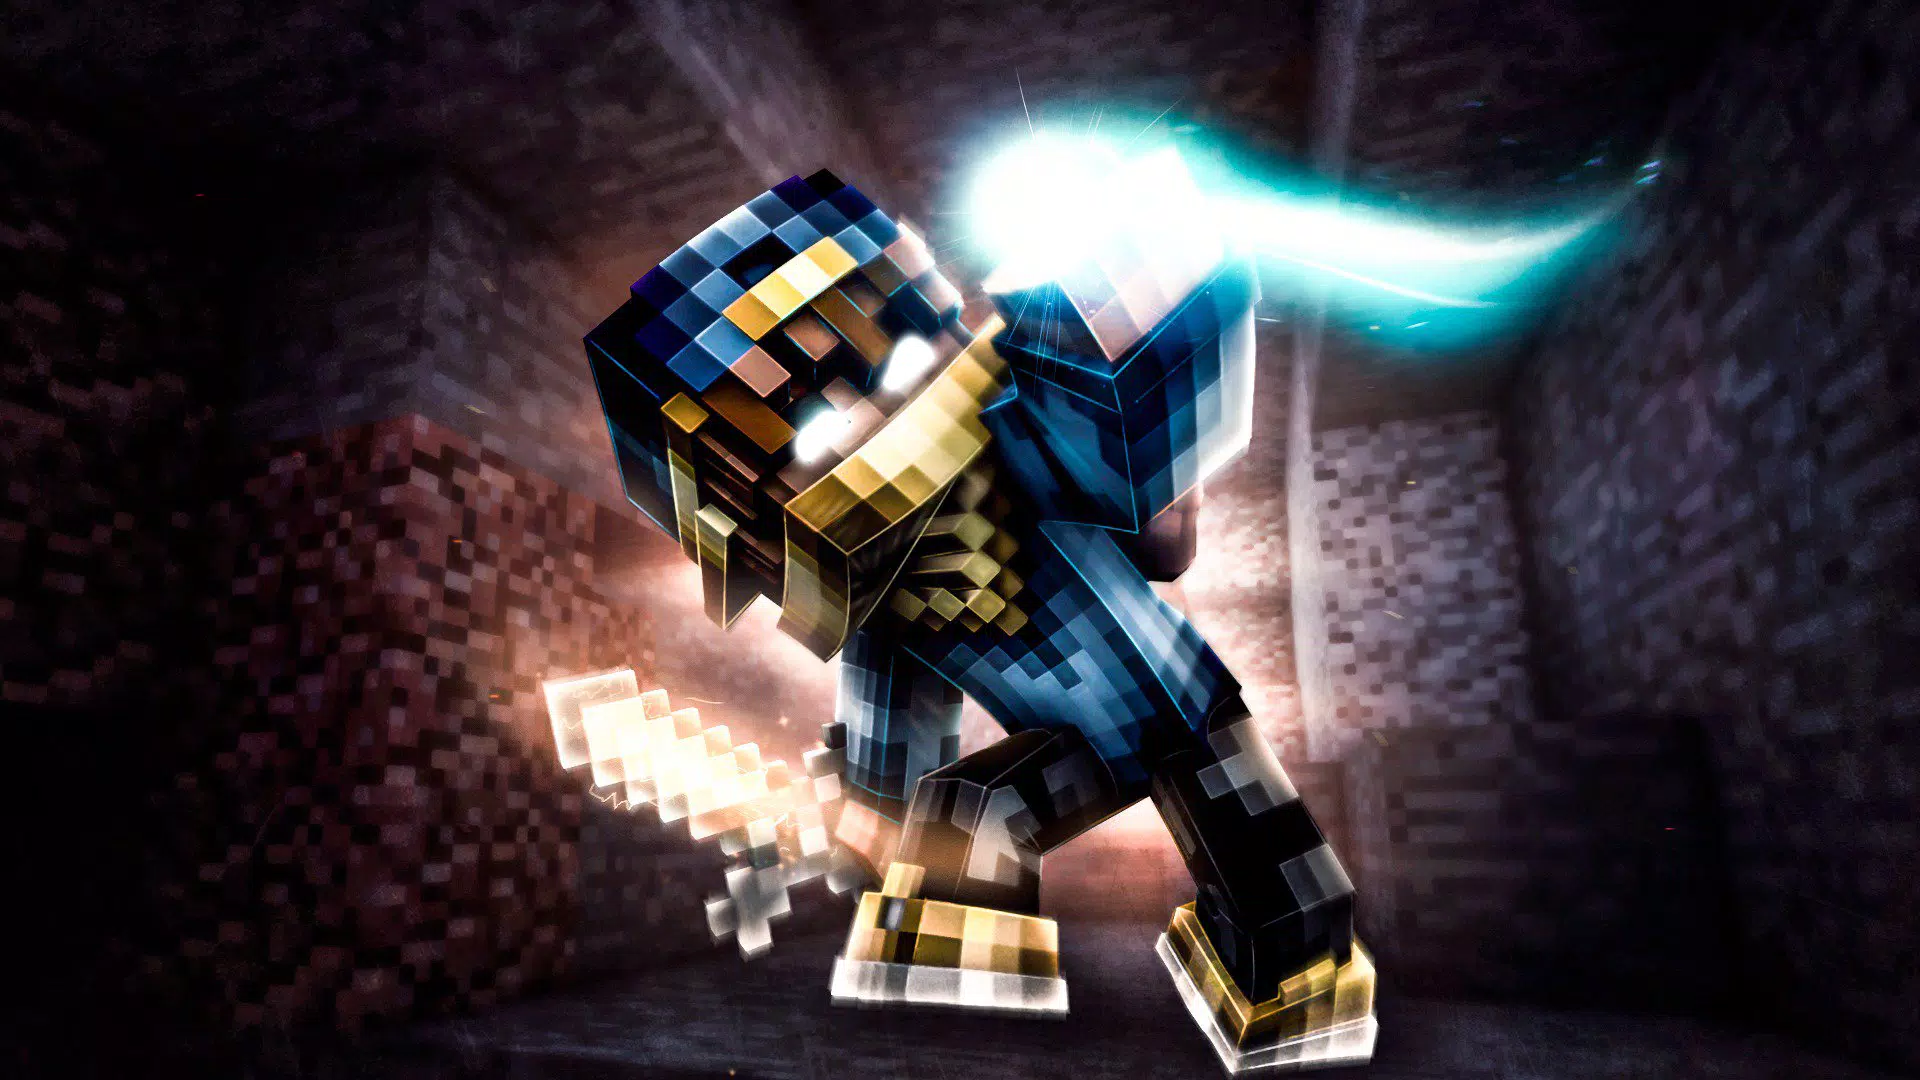 Herobrine Skins for MCPE - Minecraft PocketEdition APK for Android